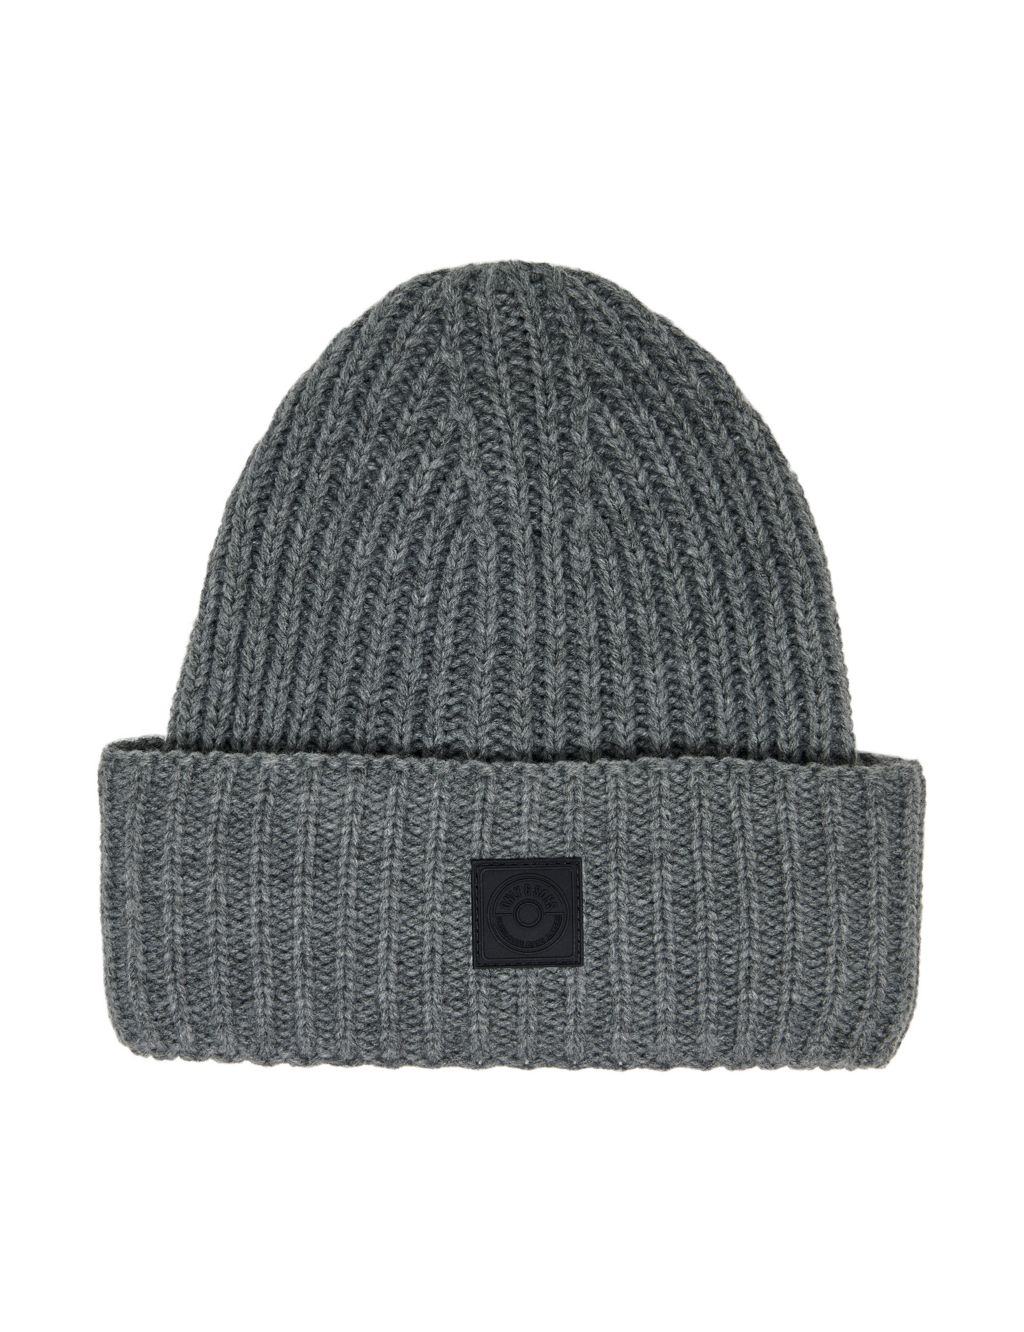 Textured Knitted Beanie Hat image 1